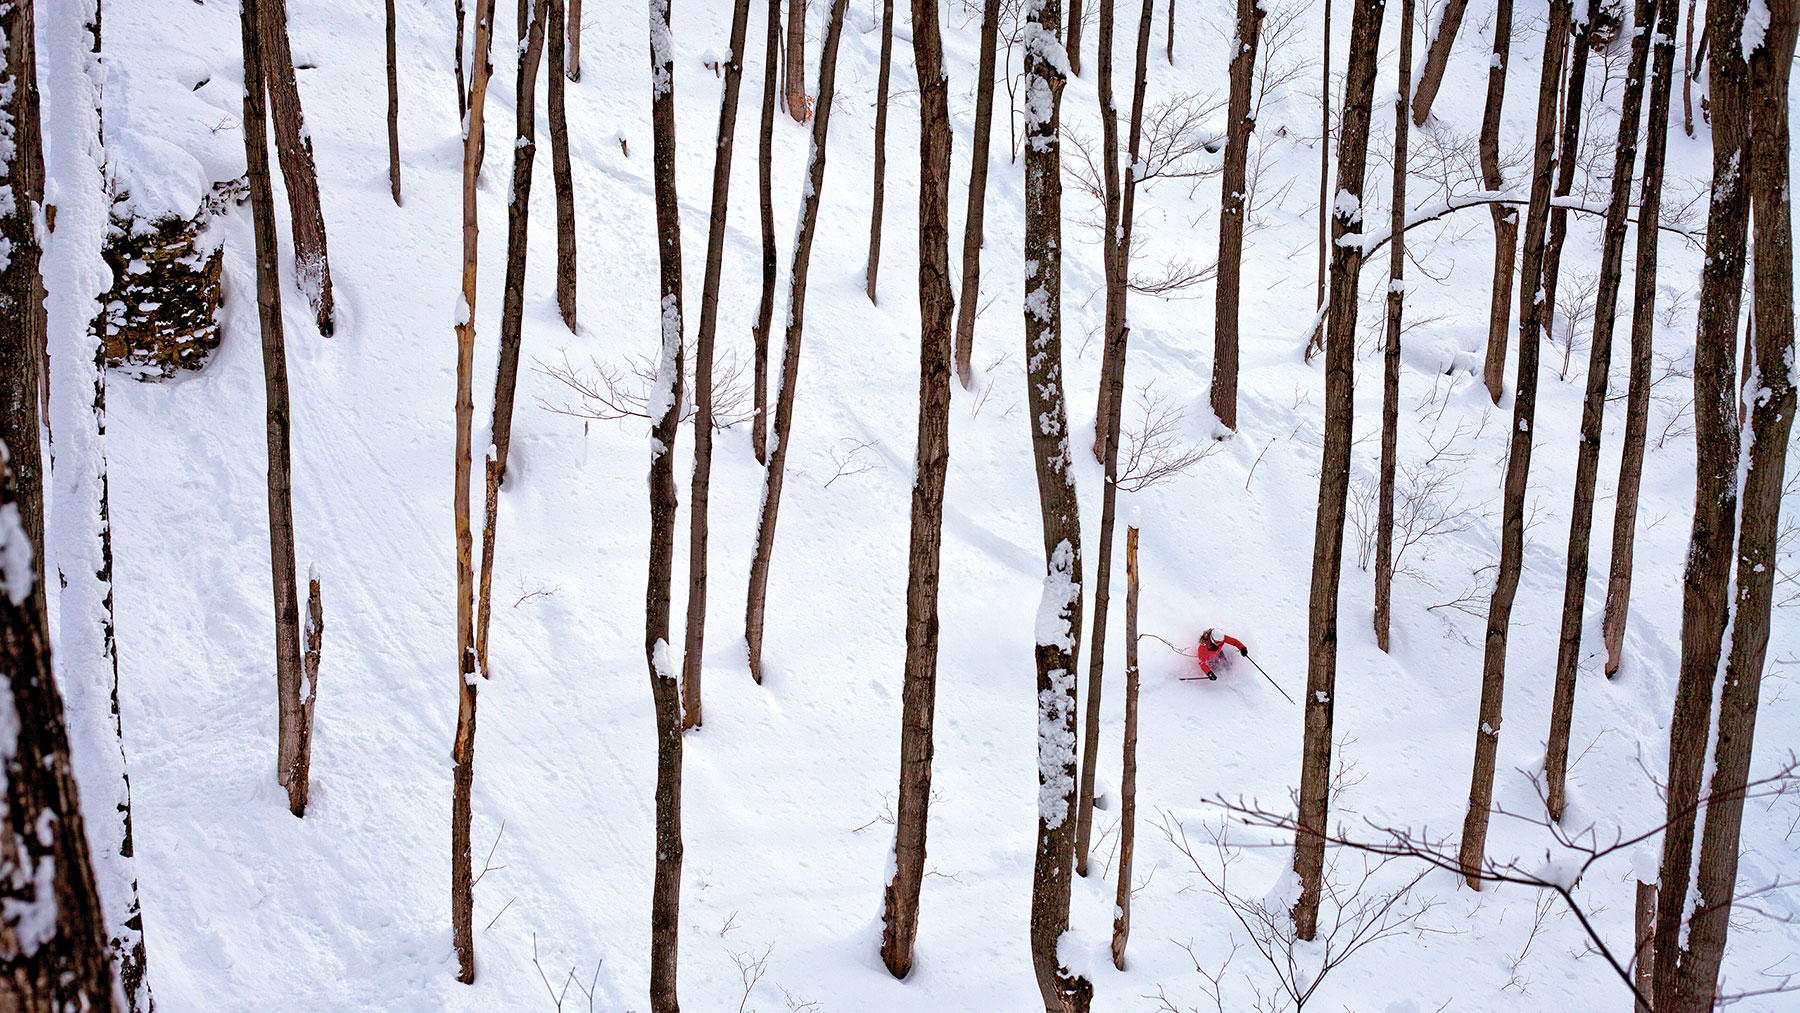 Jenna Mielzynski Nicoll gets the deep snow in some perfectly-spaced Ontario backcountry glades. Location: secret.